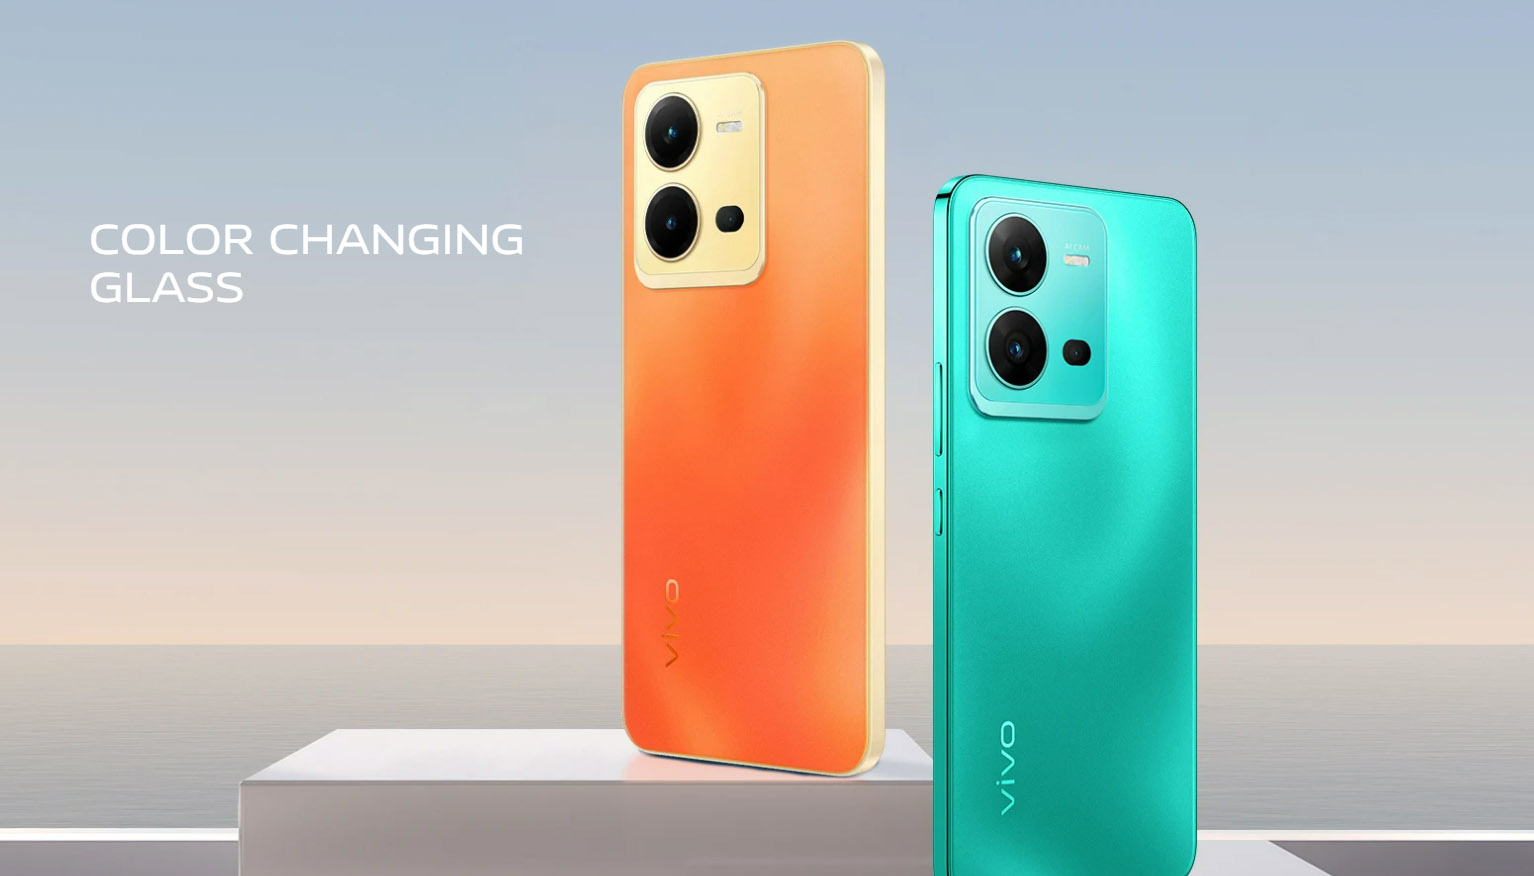 vivo Launches V25 5G and V25e with The Latest Color Changing Glass and Powerful Camera Capabilities ​